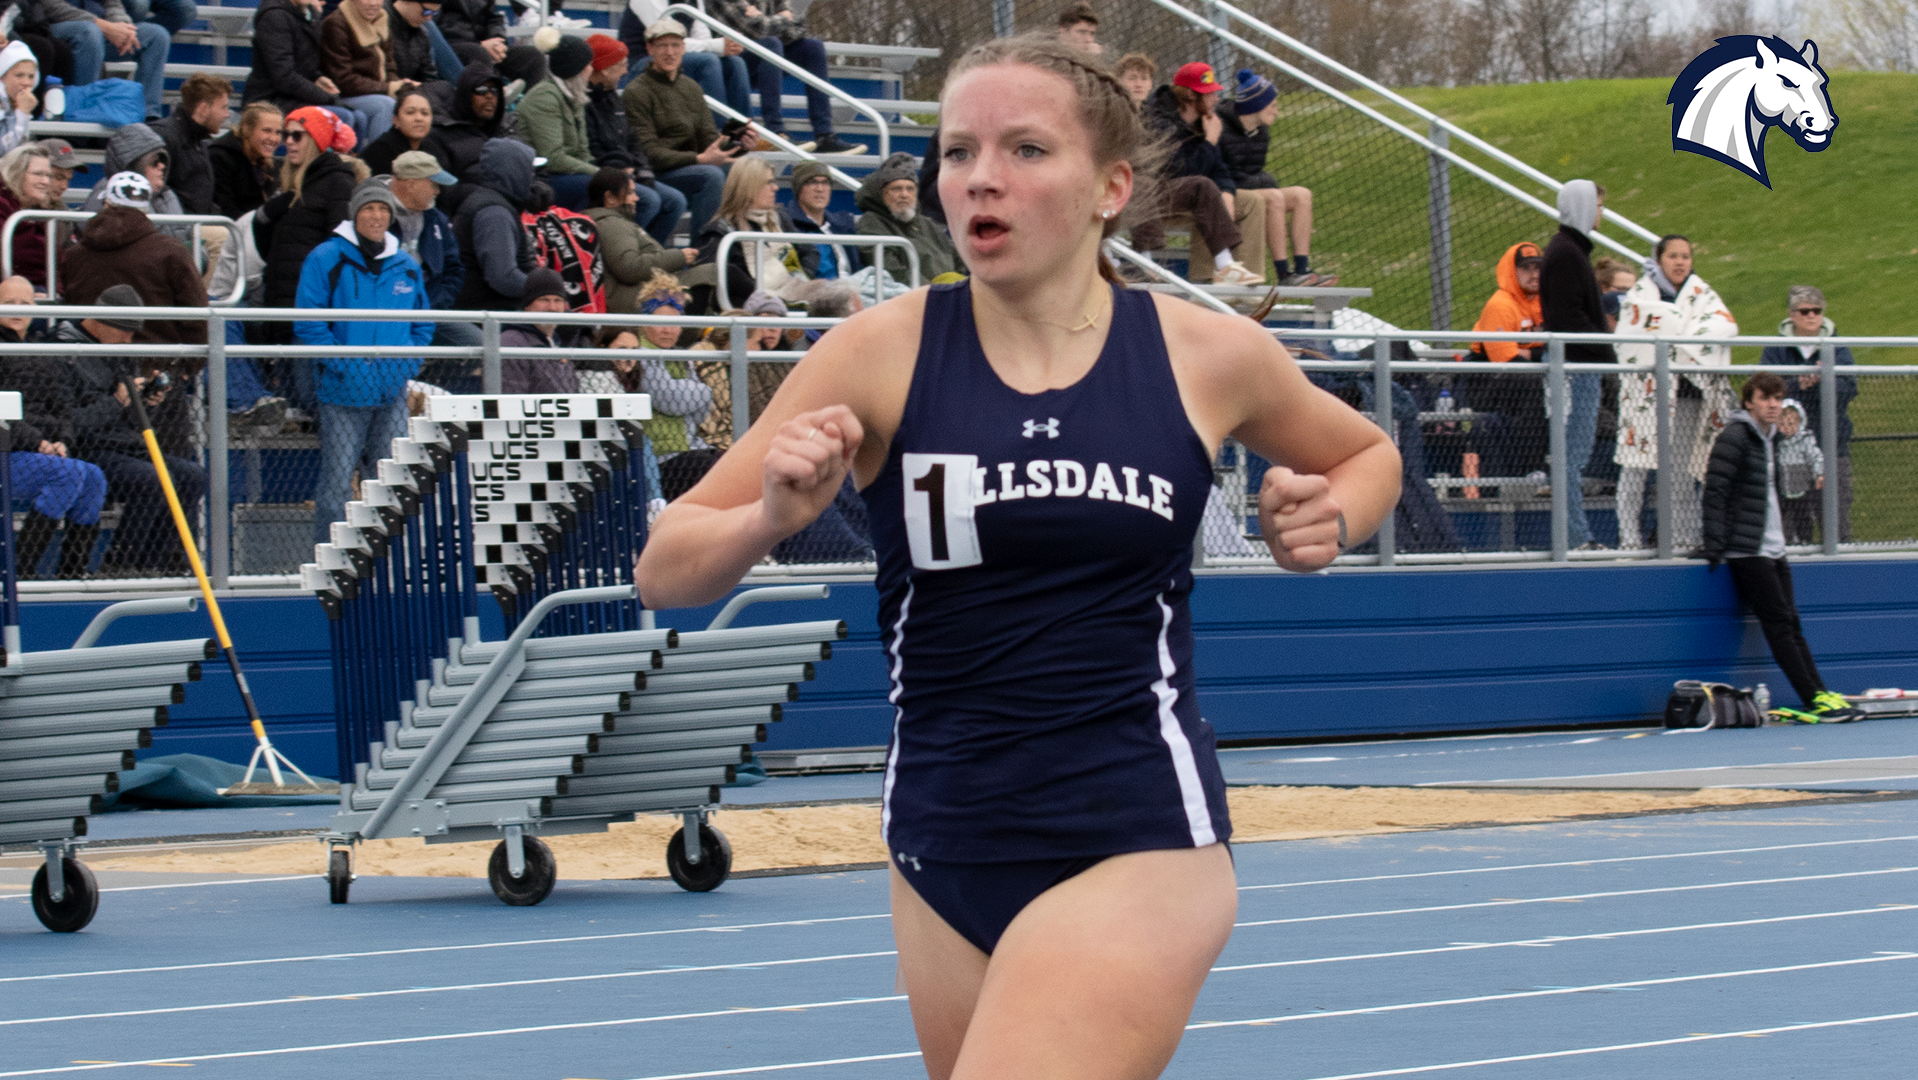 Charger women win 14 events in strong opener at new outdoor track and field facility